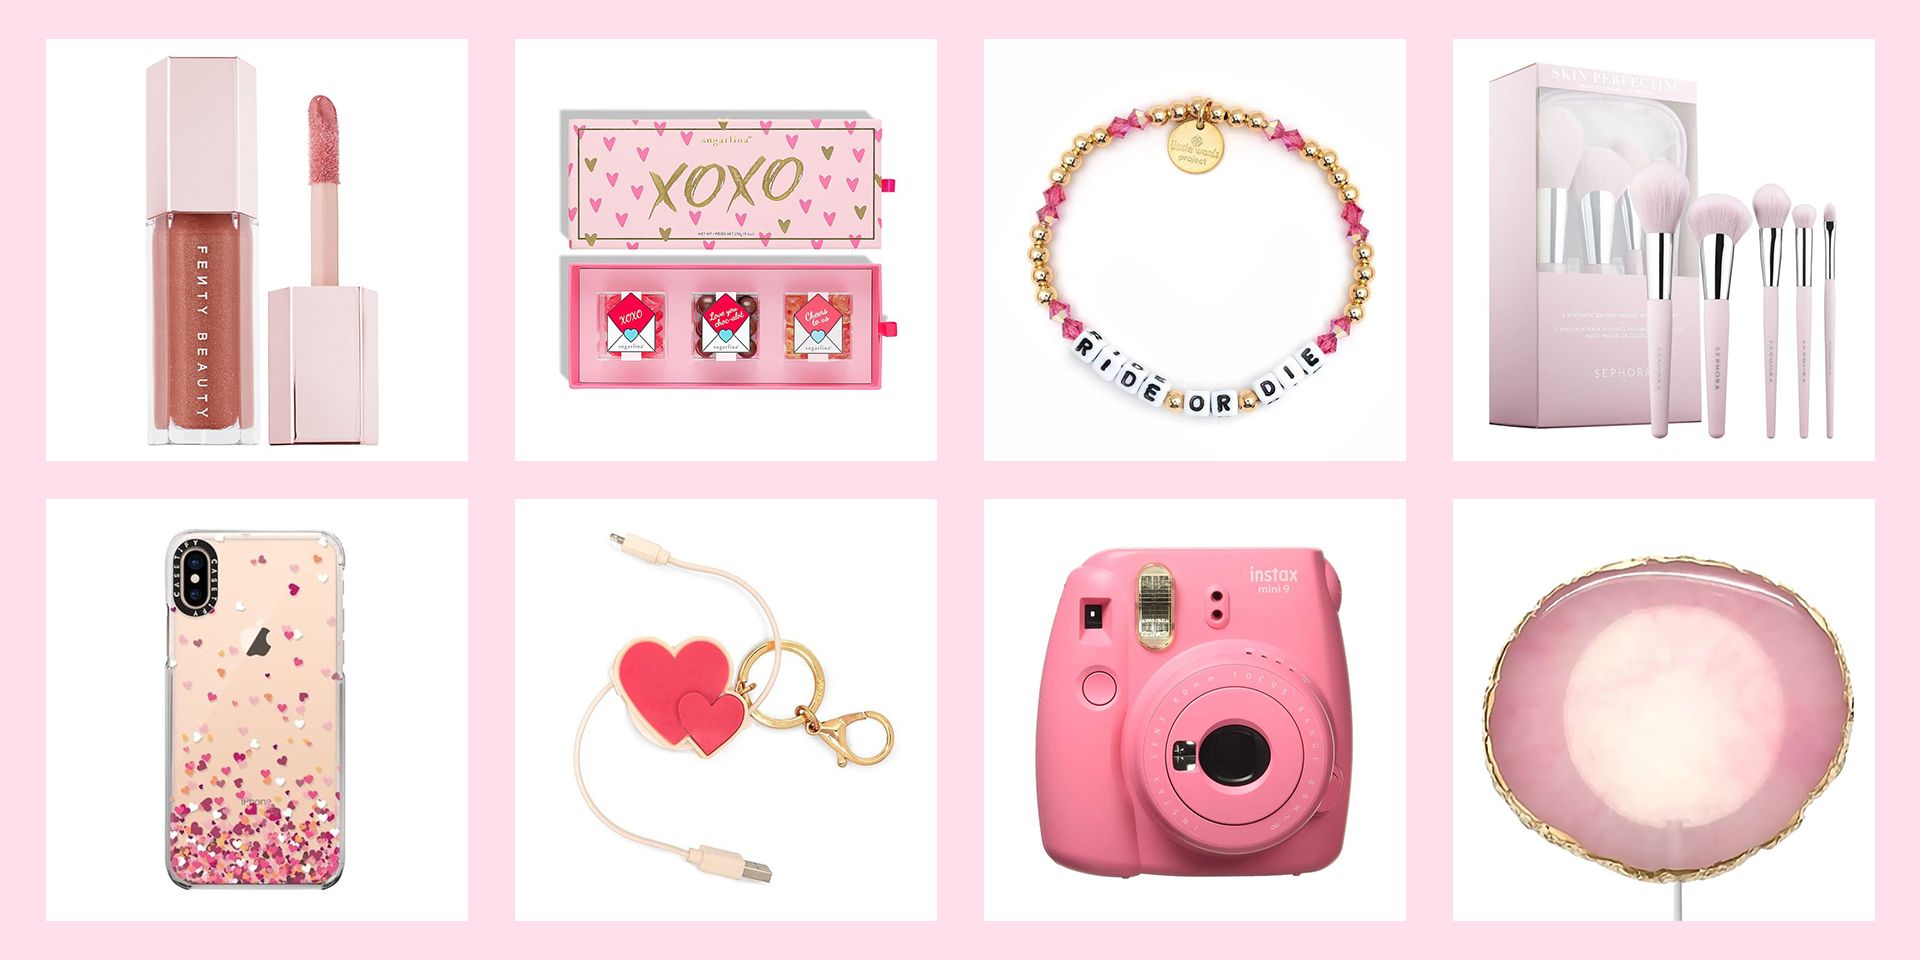 24 Best Galentine's Day Gifts for 2022 - What to Give for Galentines Day